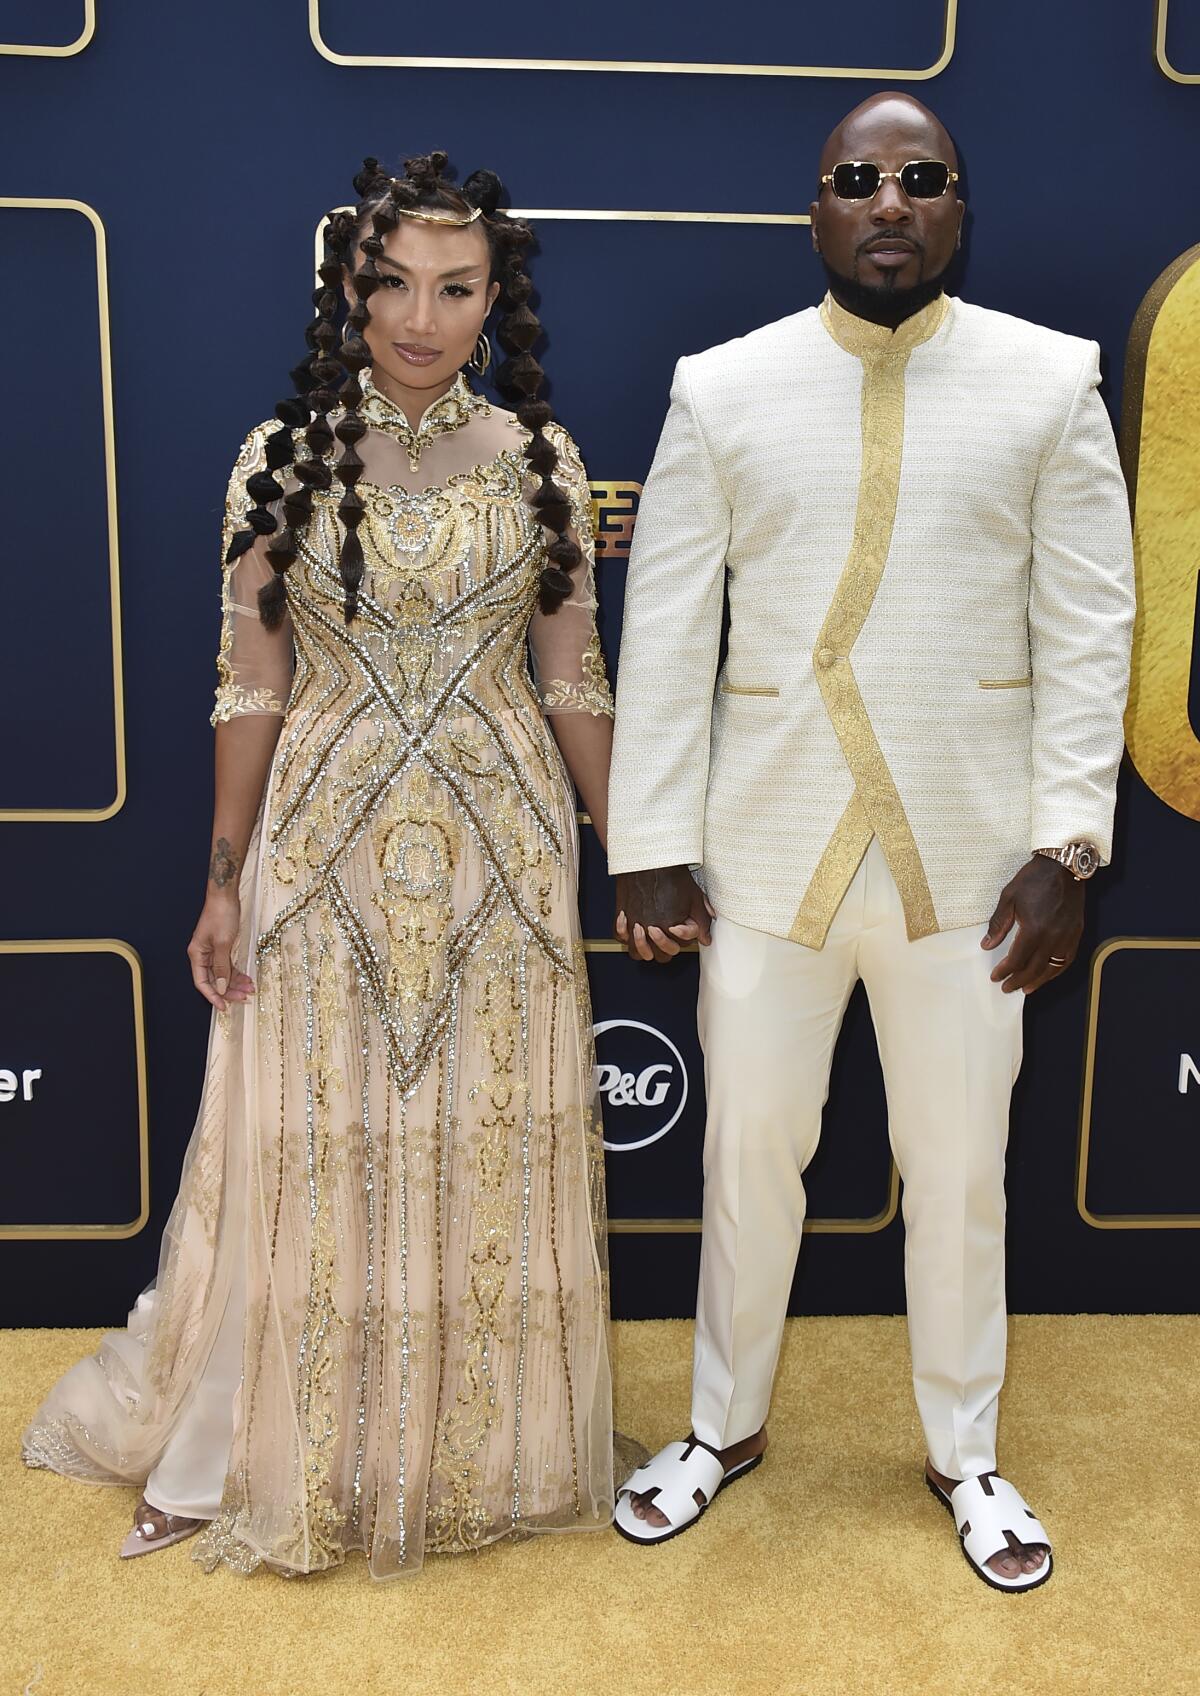 Jeannie Mai Jenkins in an intricate gold gown holding hands with Jeezy in a white tunic and pants